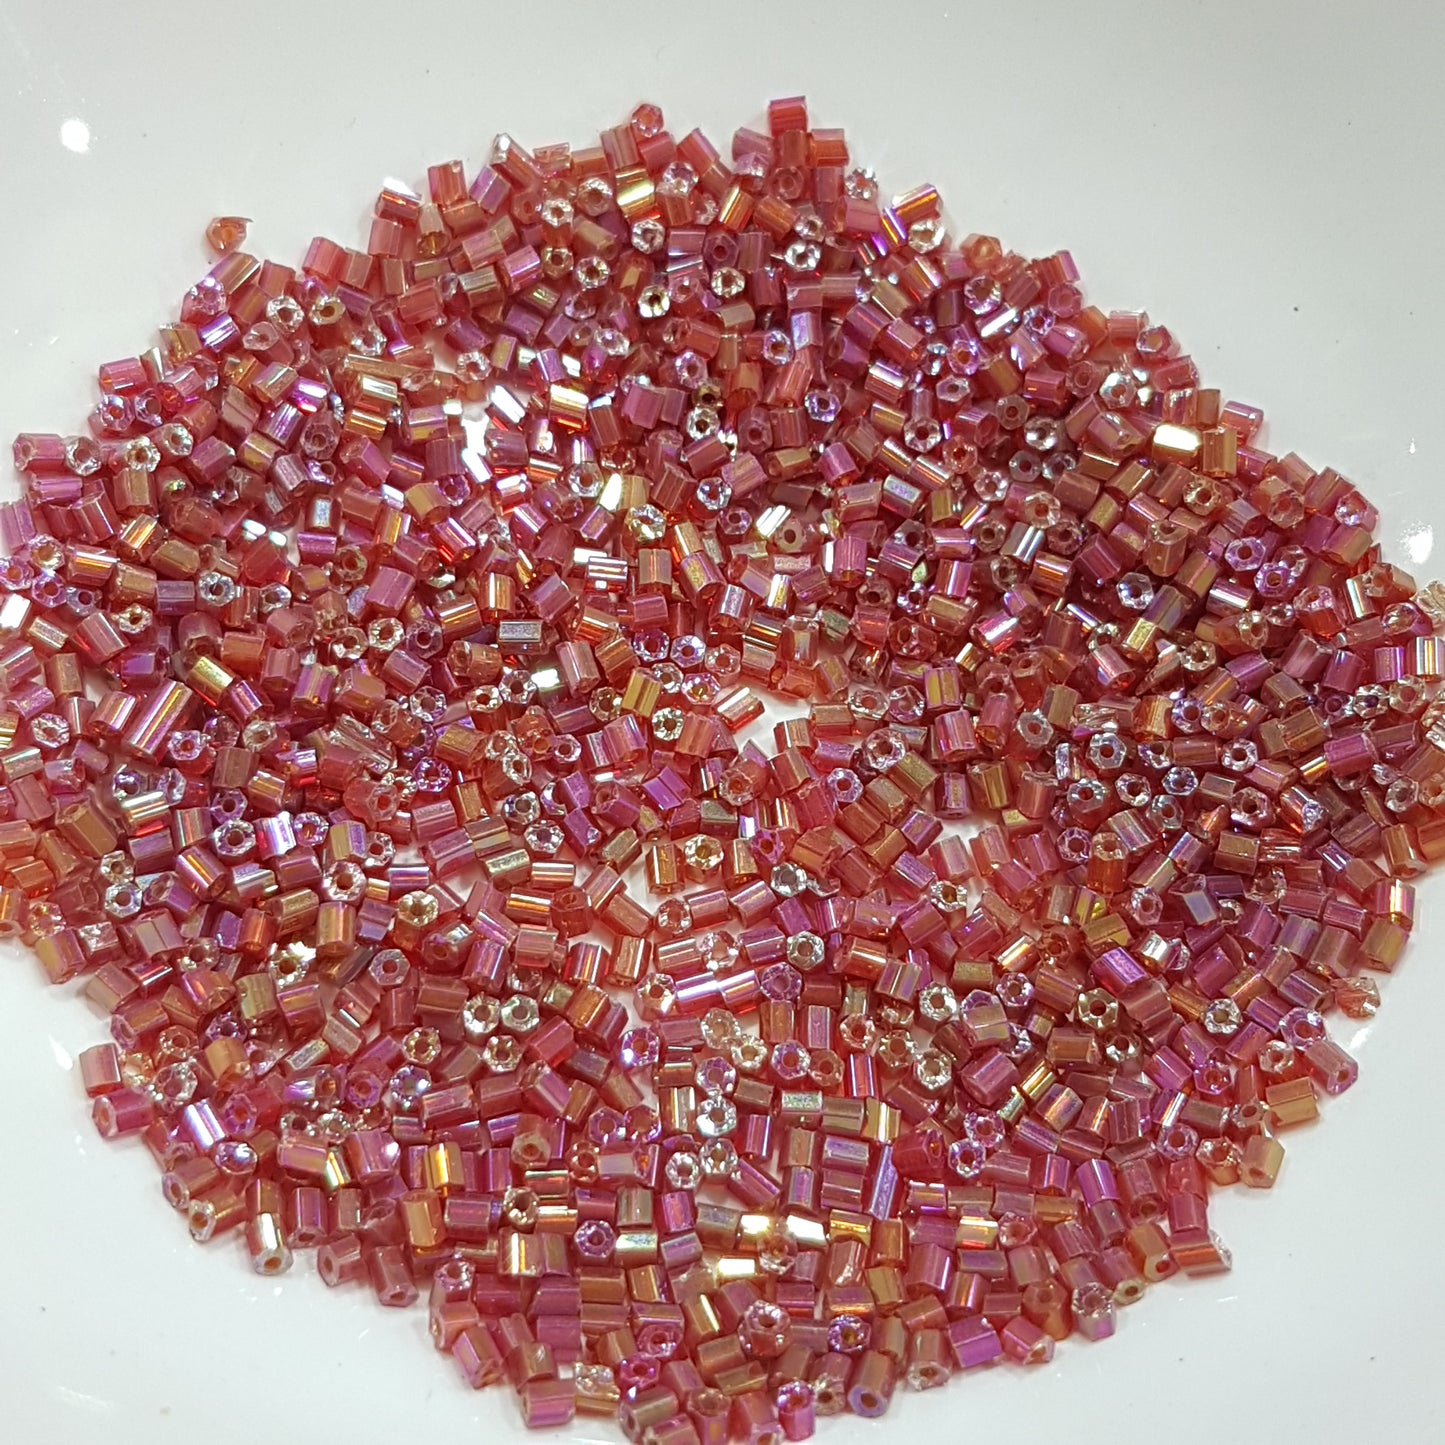 15g 11/0 Red AB 2 Cut Seed Beads